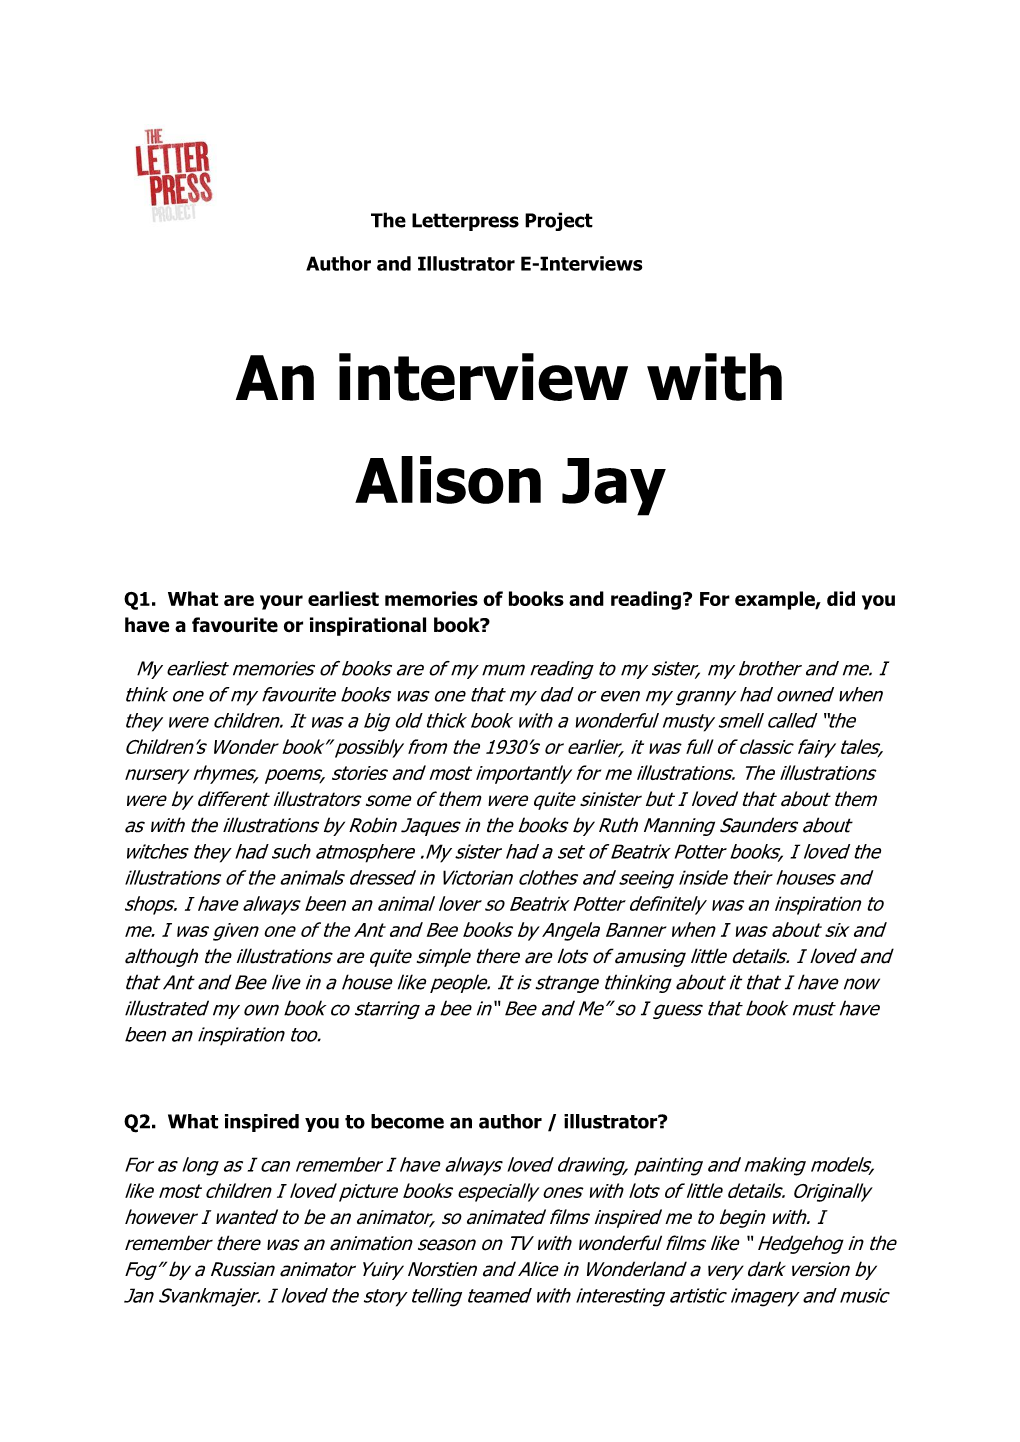 An Interview with Alison Jay